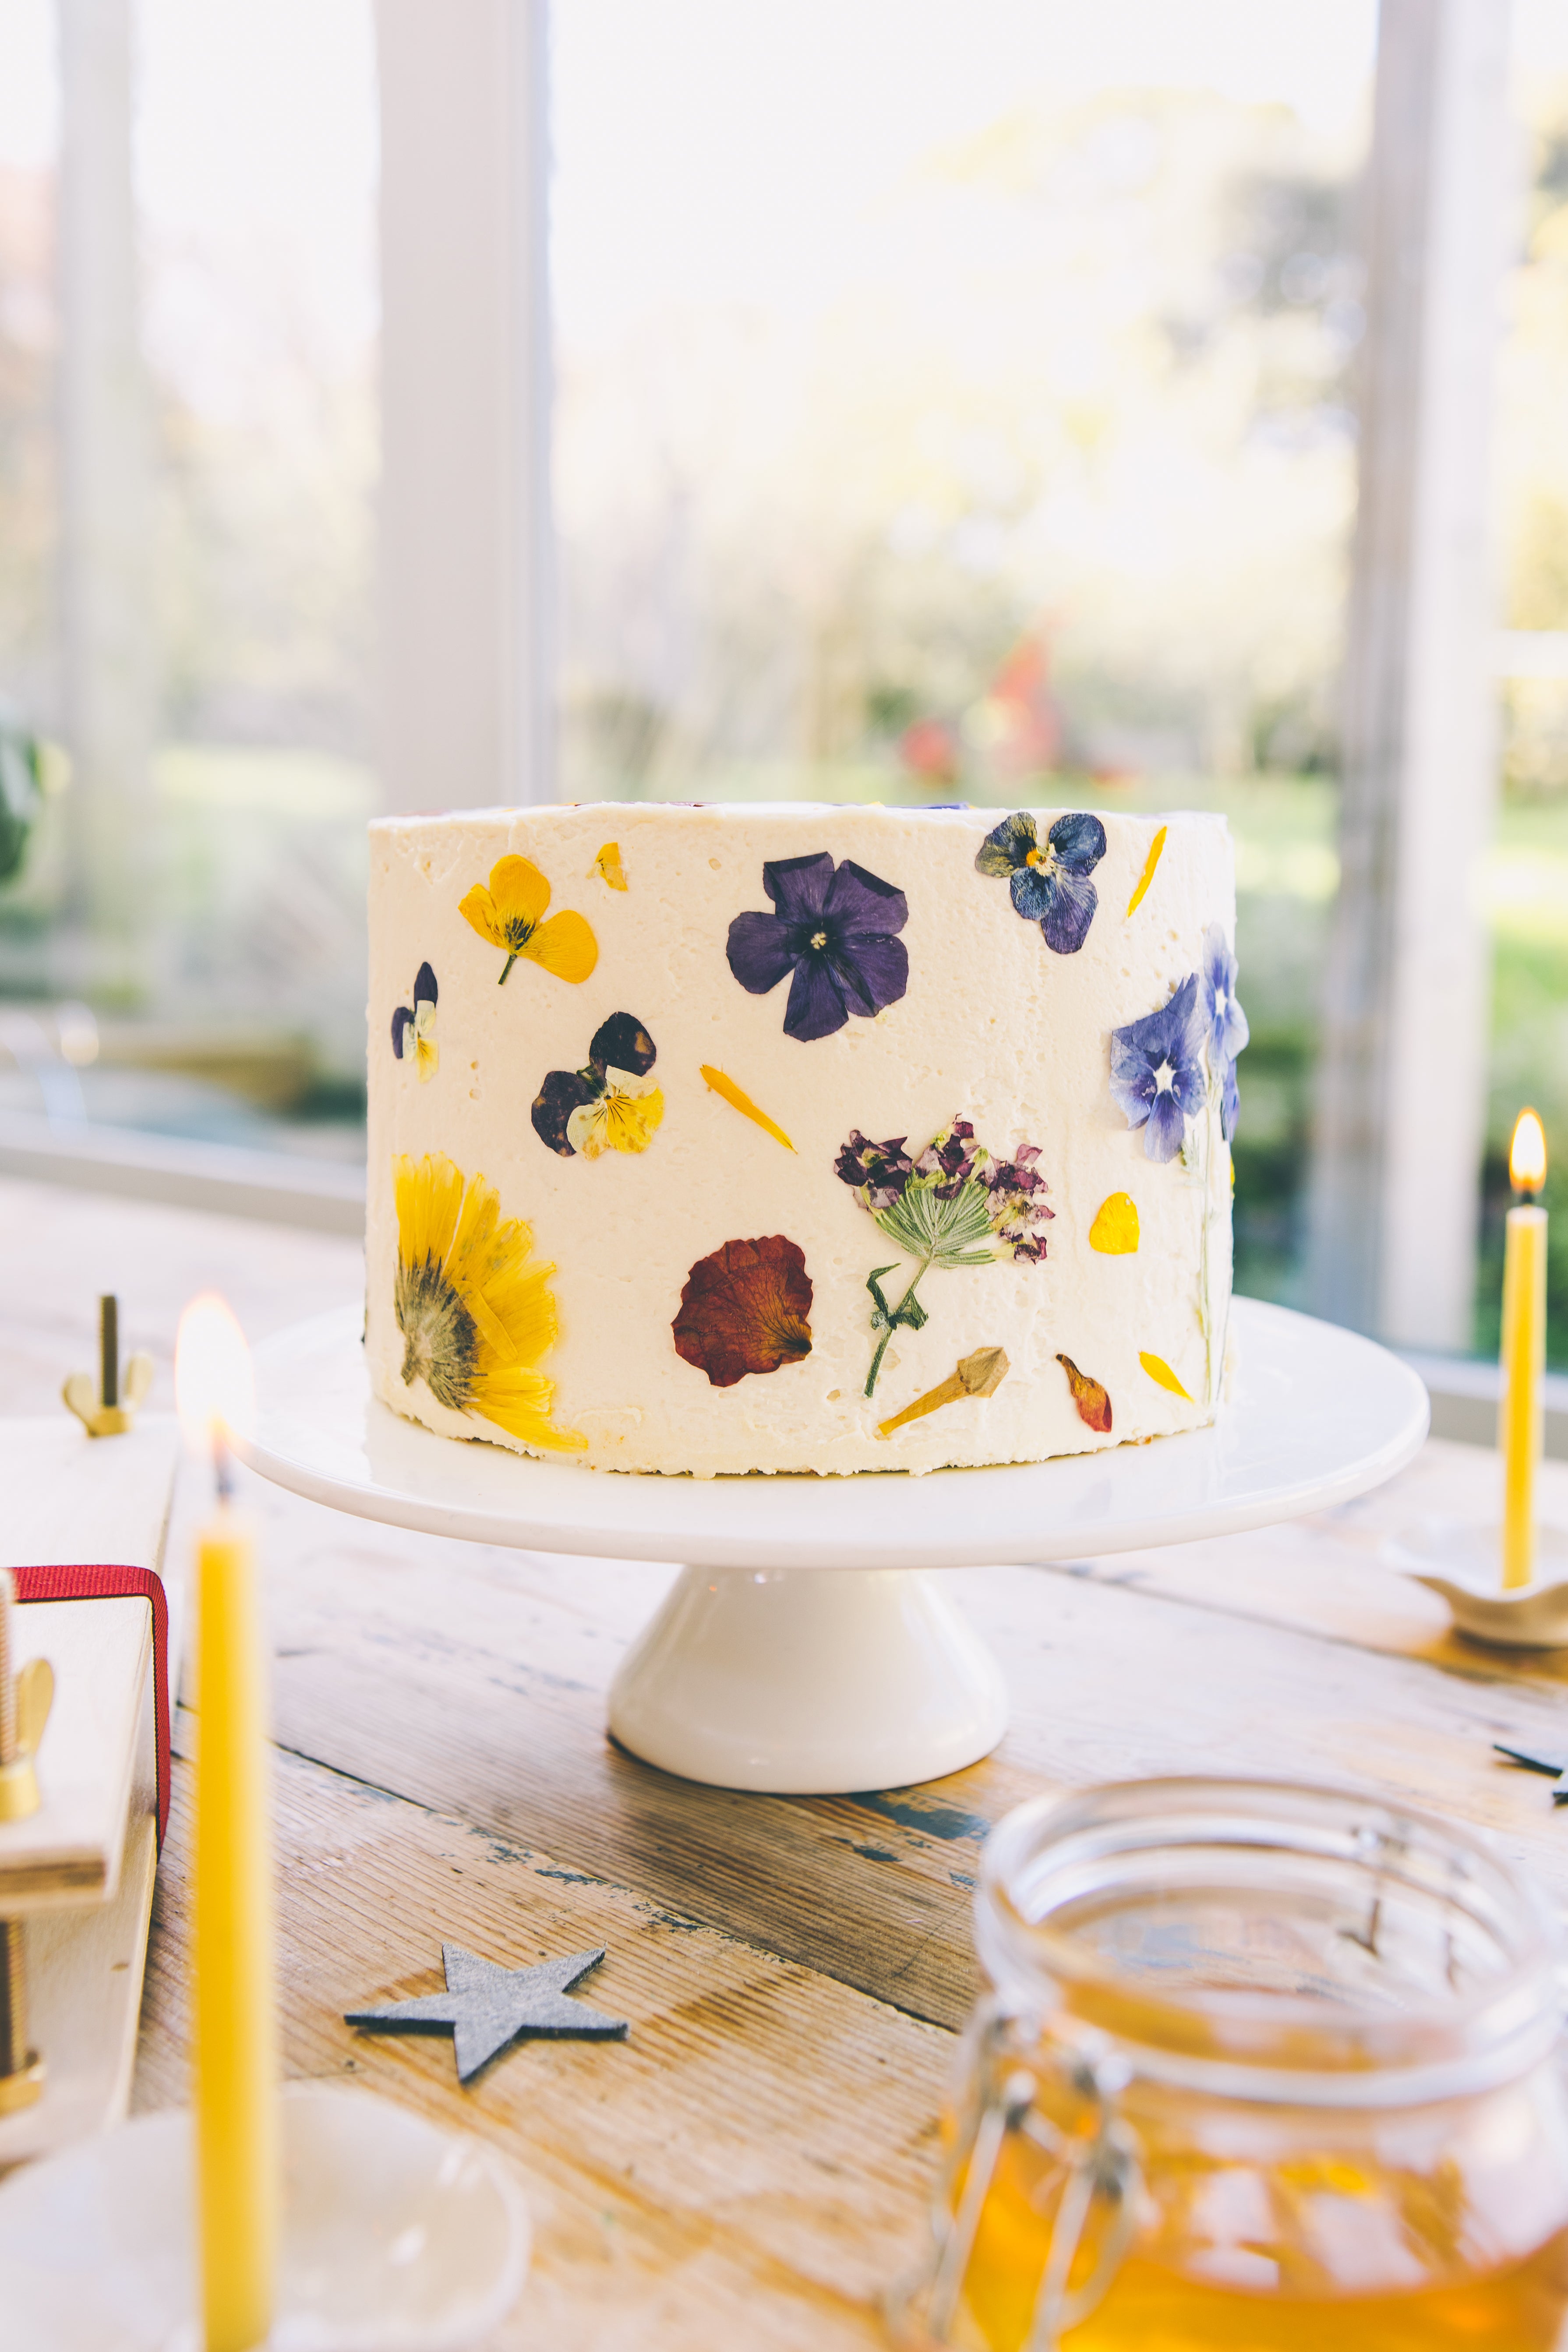 A large white buttercream frosted cake decorated in pressed wild flower in various colours, with lit, yello beeswa candles in the foreground and background.